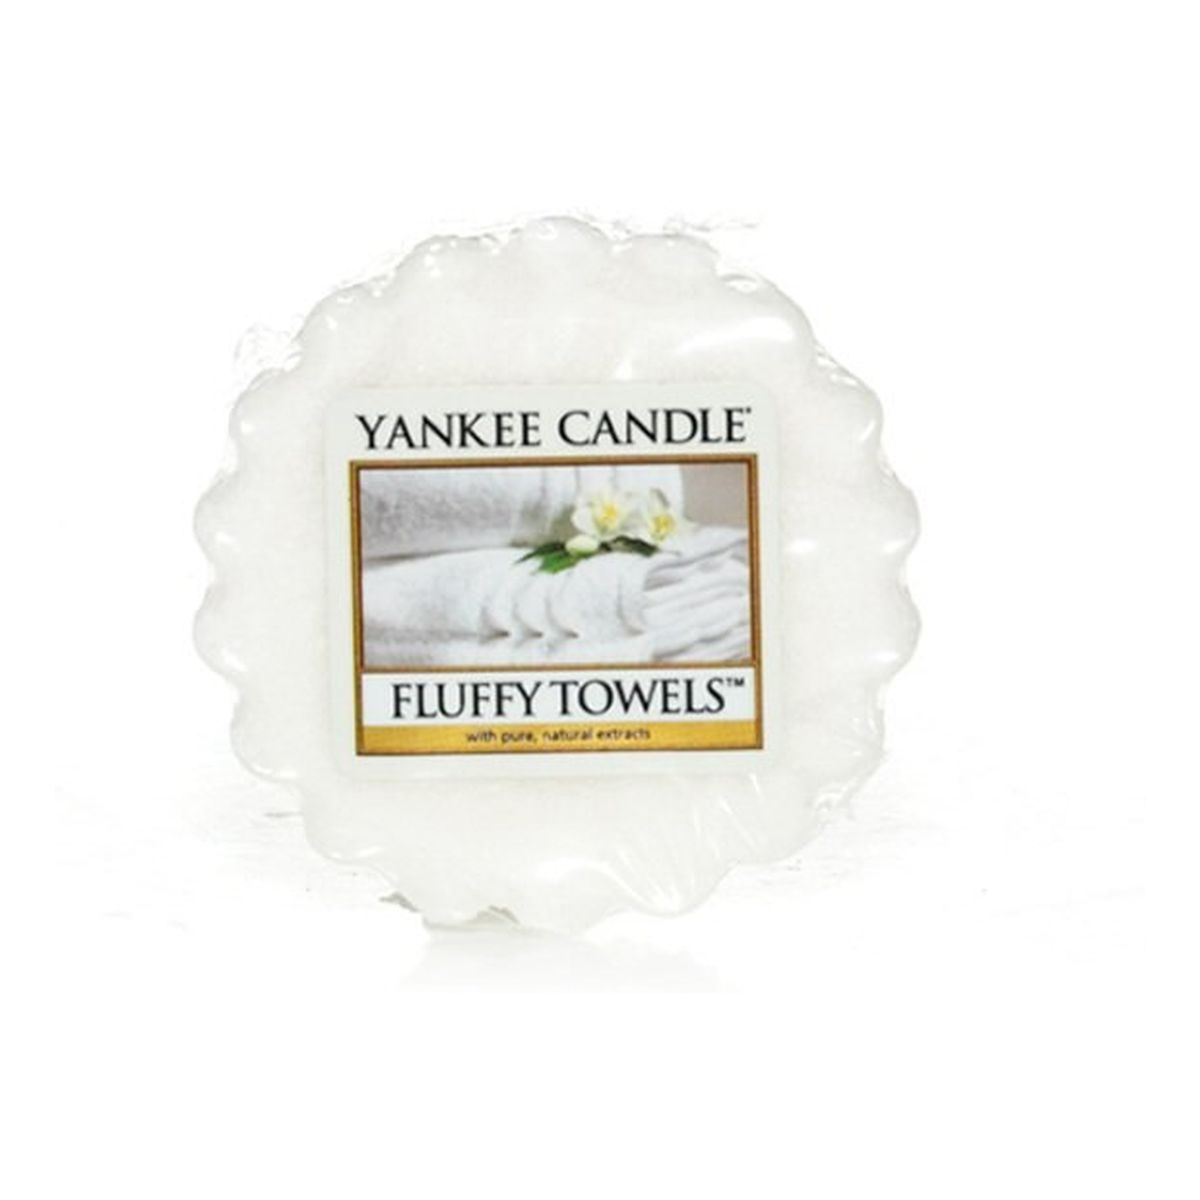 Yankee Candle Wax wosk zapachowy Fluffy Towels 22g